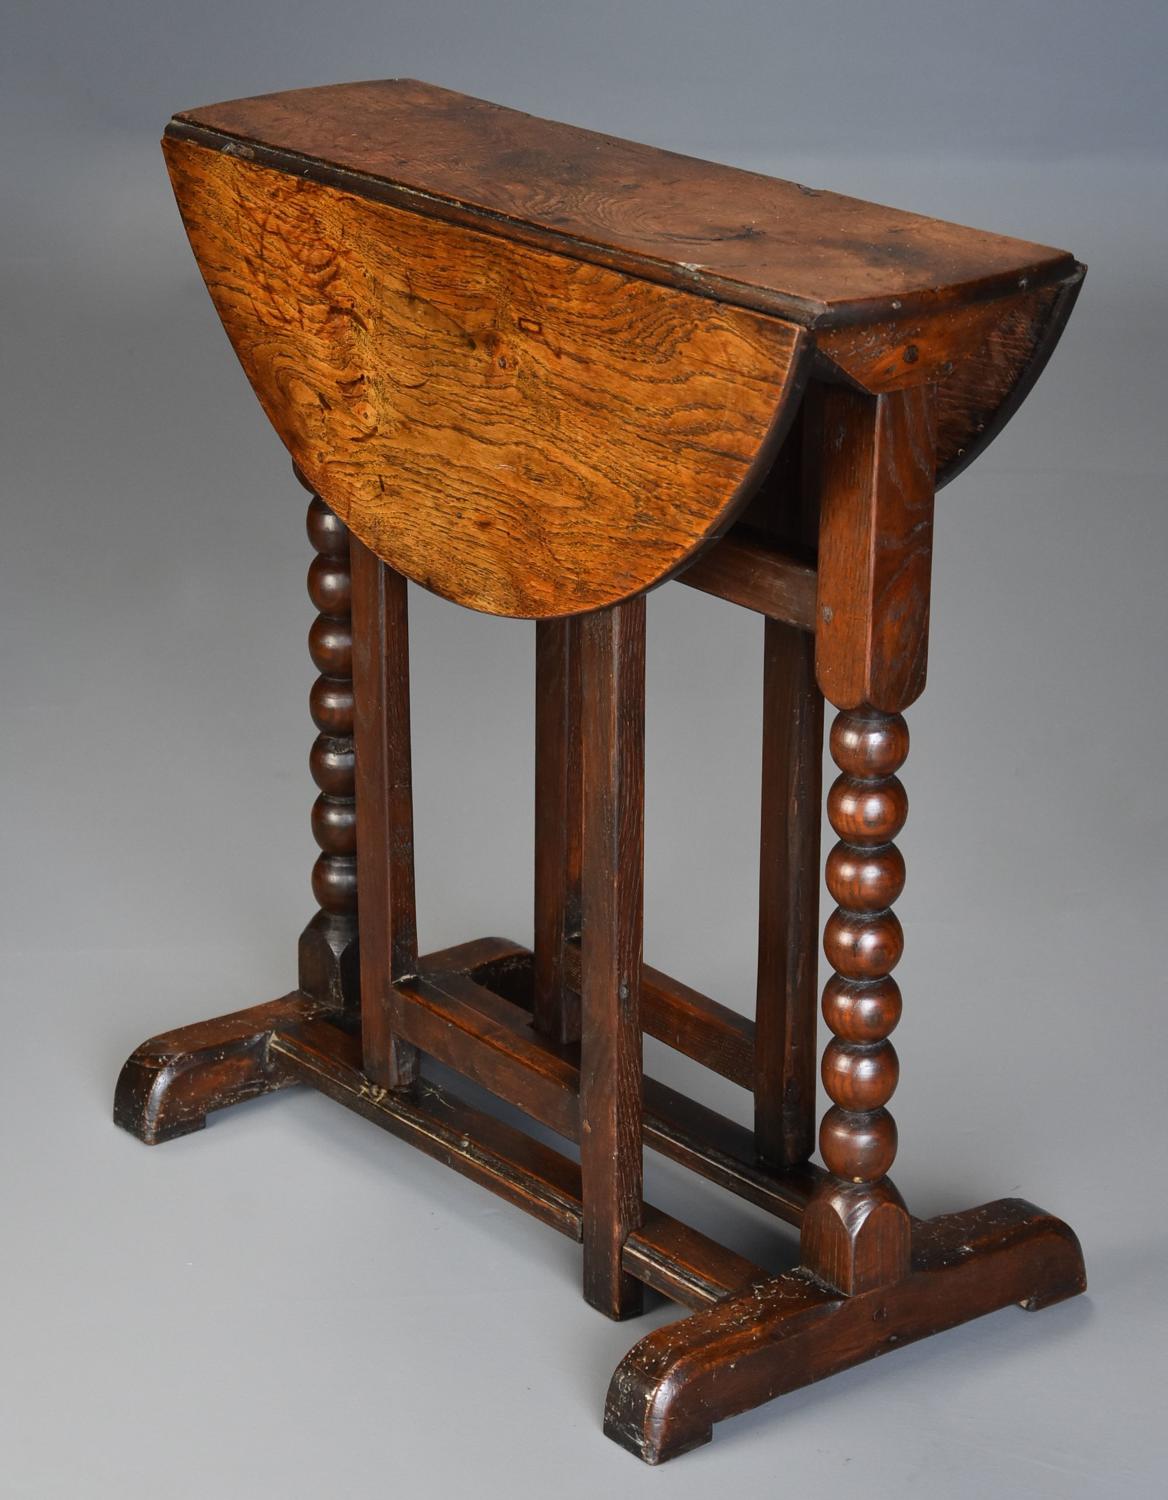 Extremely rare 17thc oak joined gateleg table of small proportions